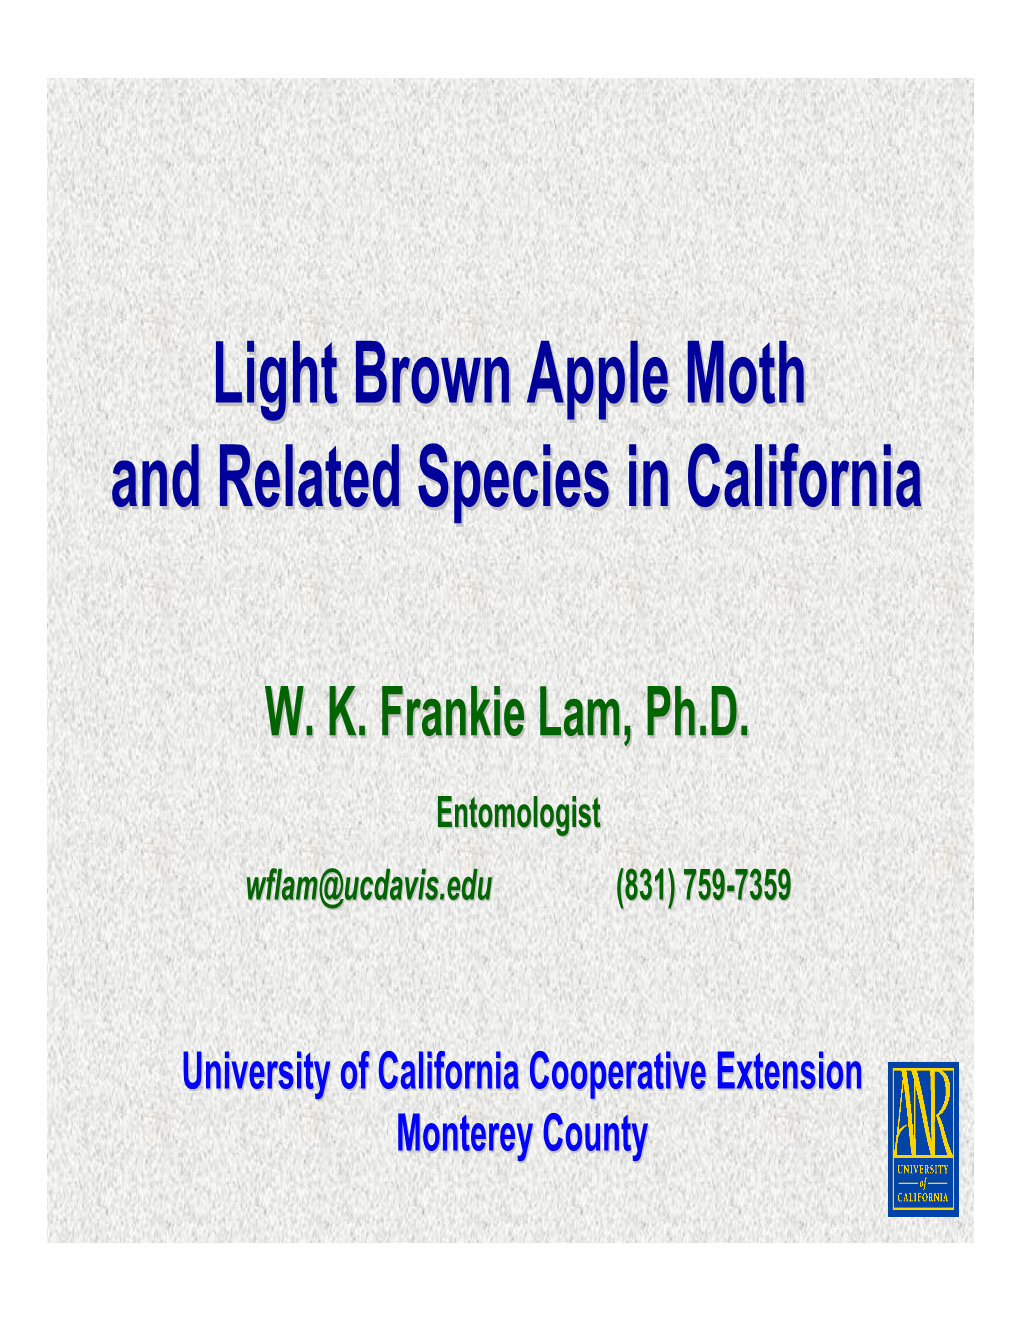 Light Brown Apple Moth and Related Species in California